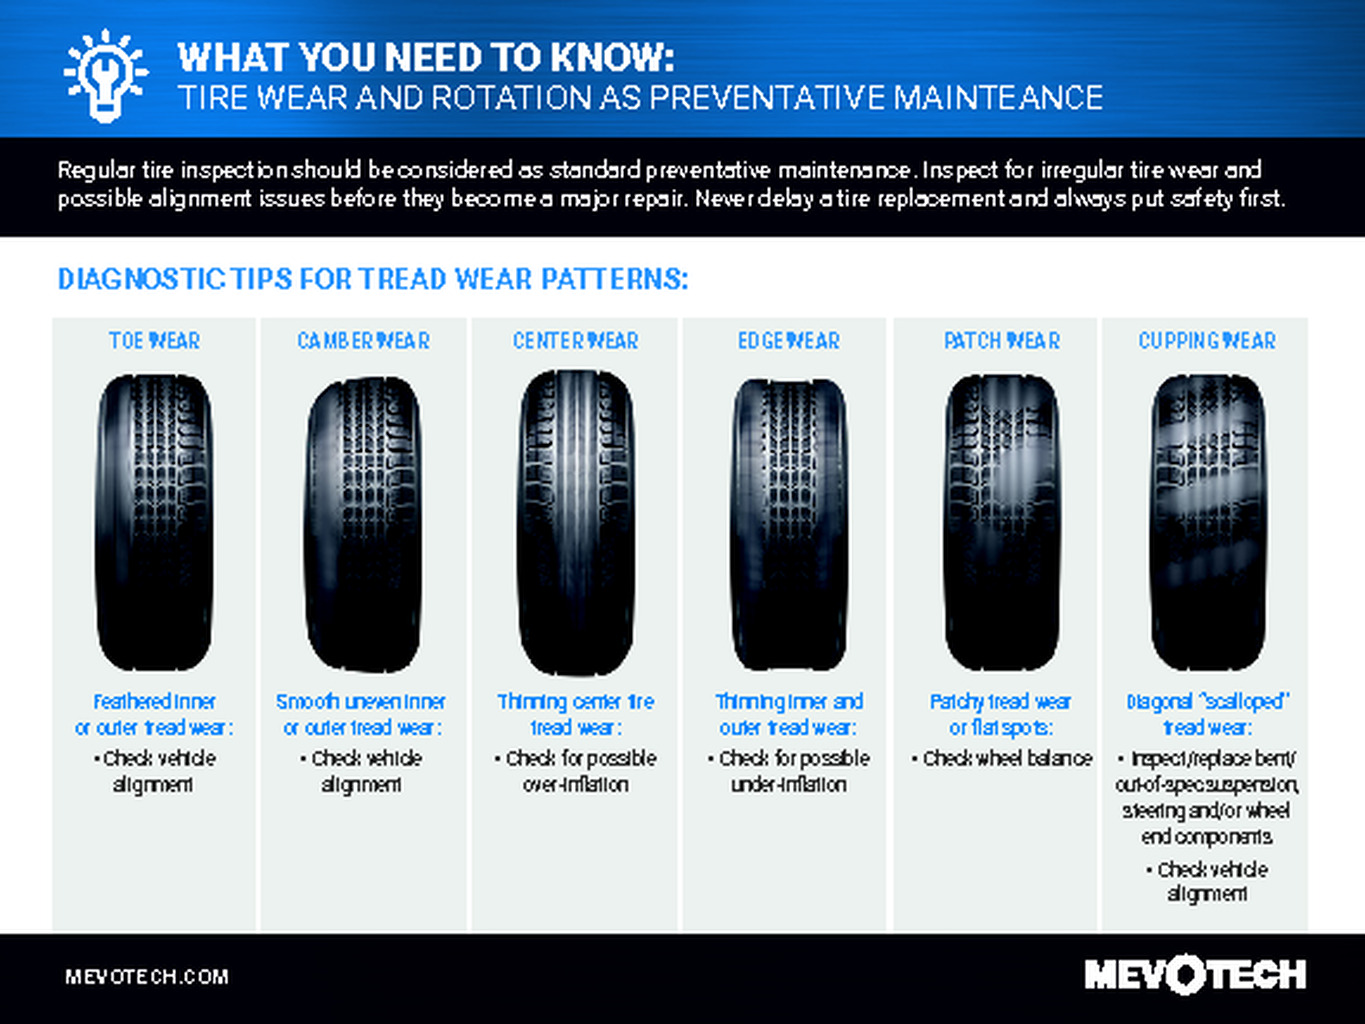 WHAT YOU NEED TO KNOW-TIRE WEAR AND ROTATION AS PREVENTATIVE MAINTEANCE